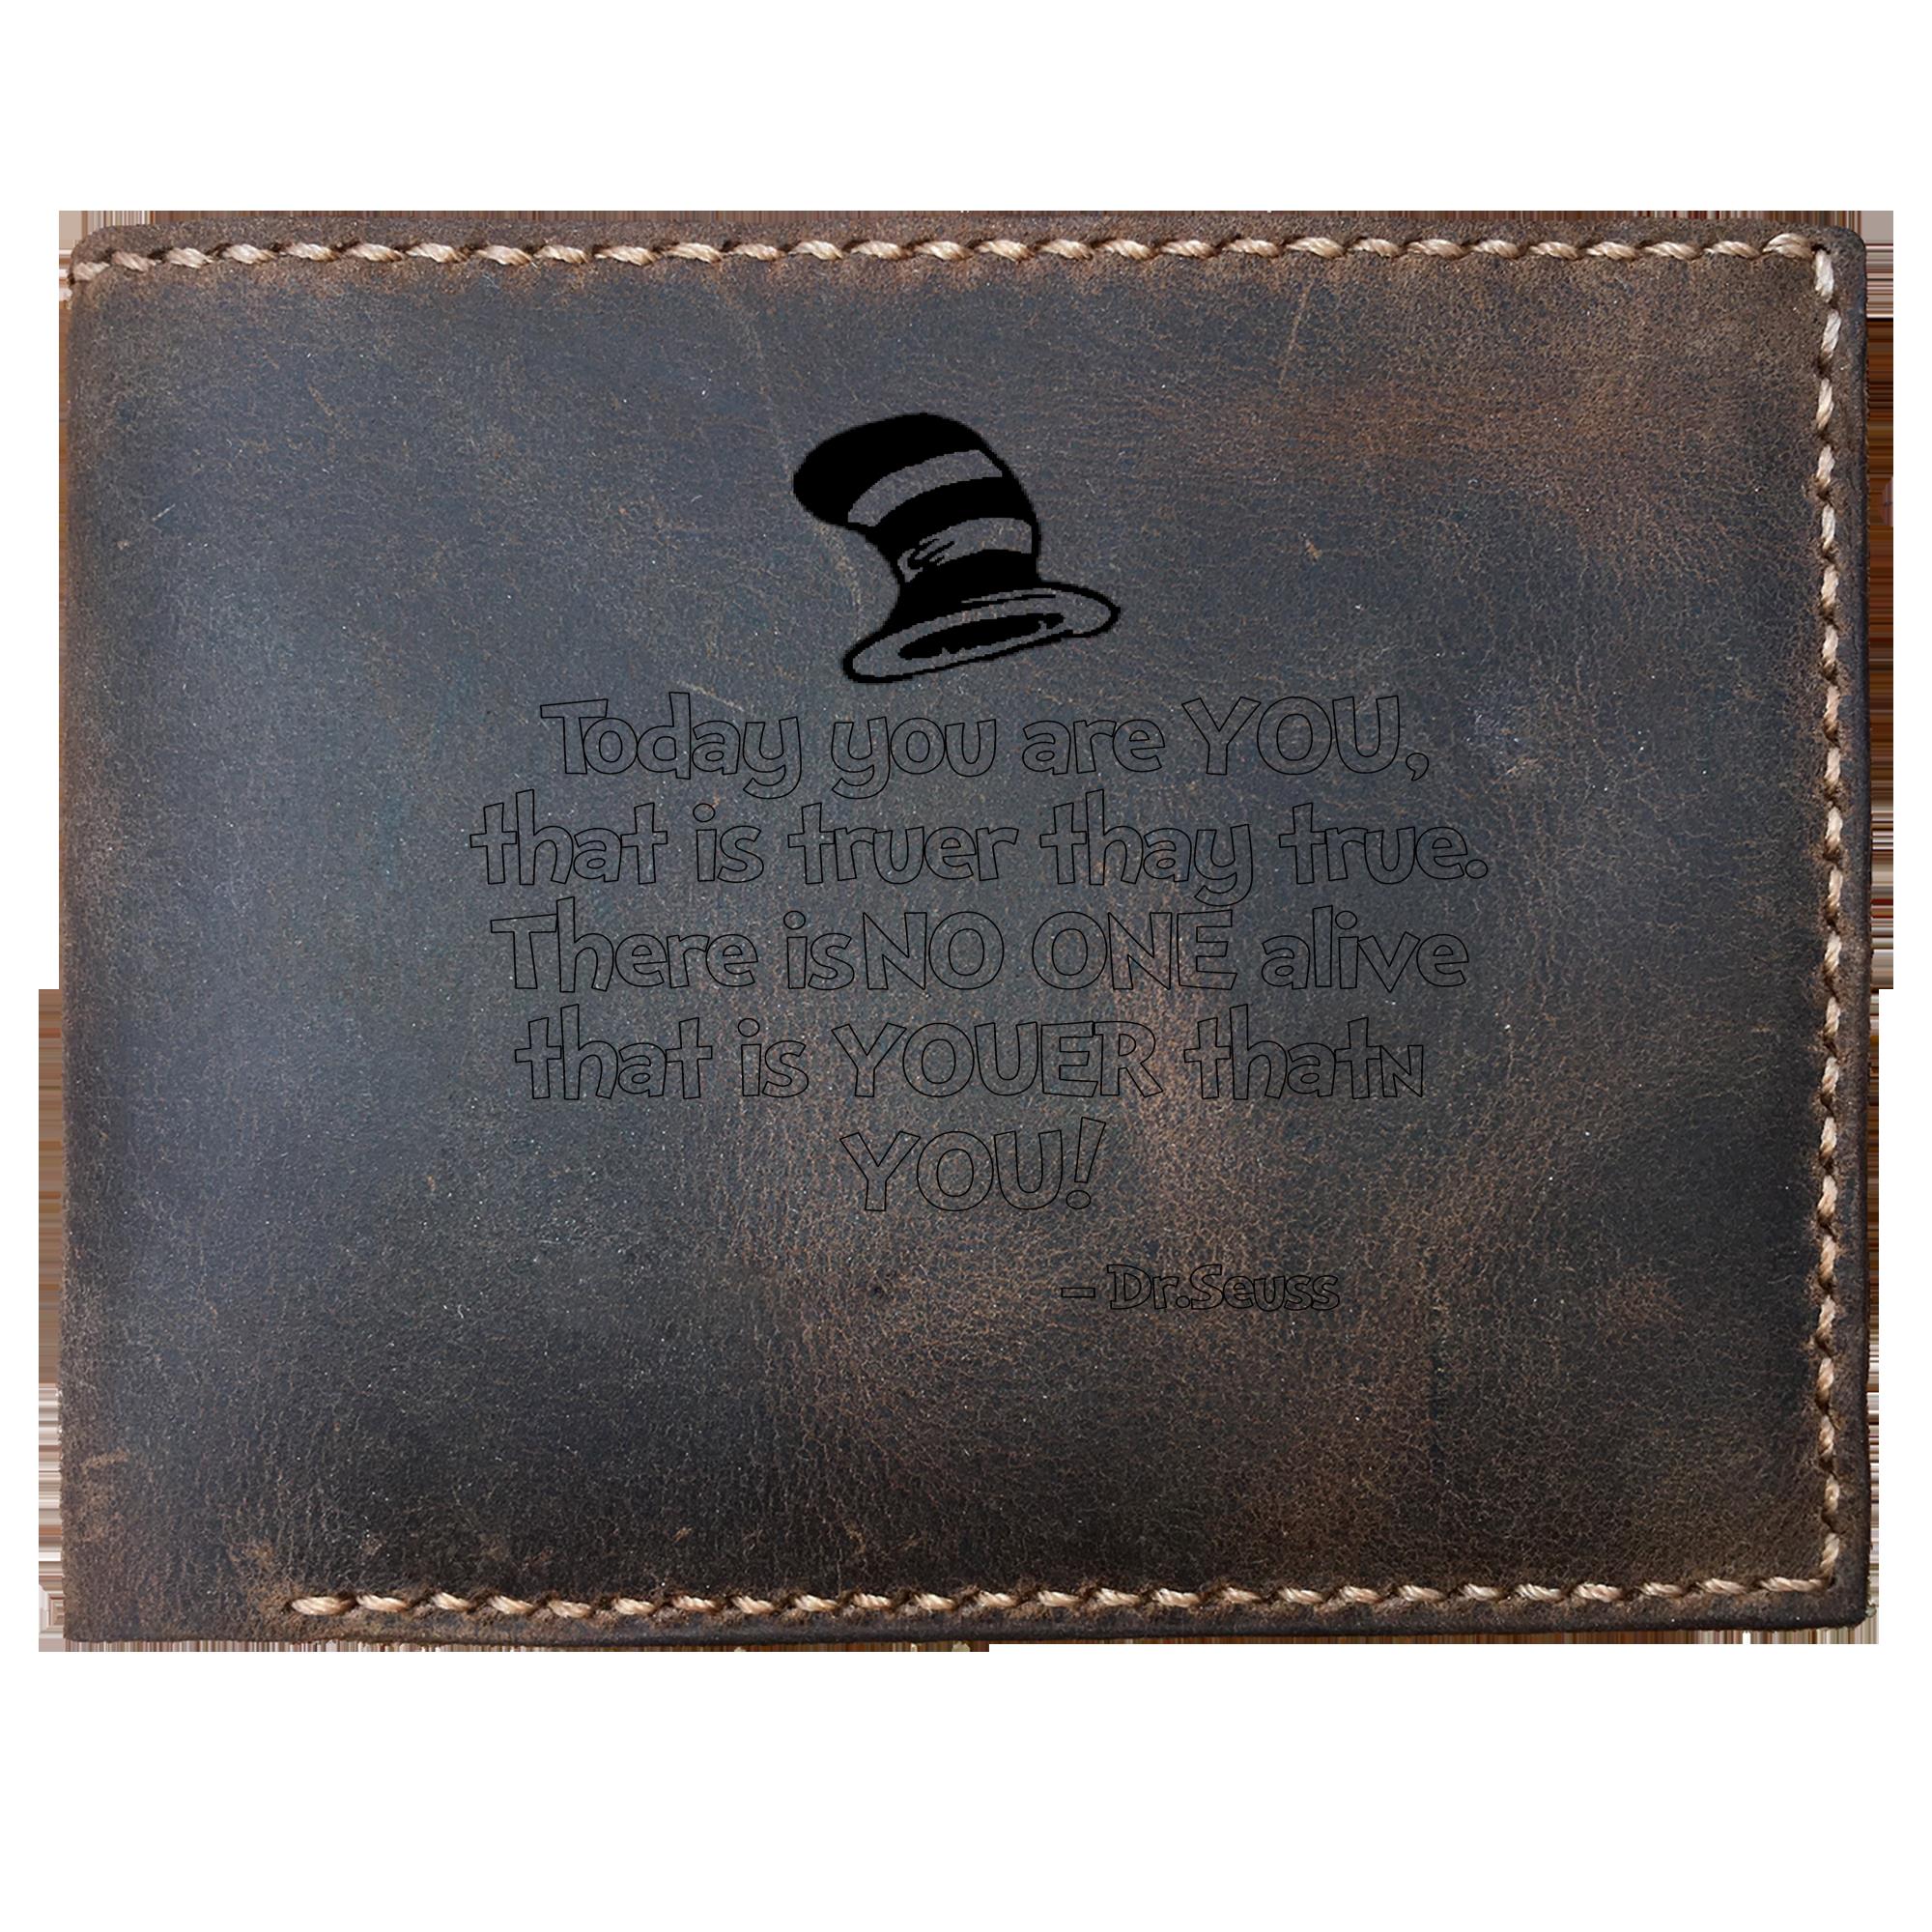 Skitongifts Funny Custom Laser Engraved Bifold Leather Wallet For Men, Today You Are You Drseuss Quote